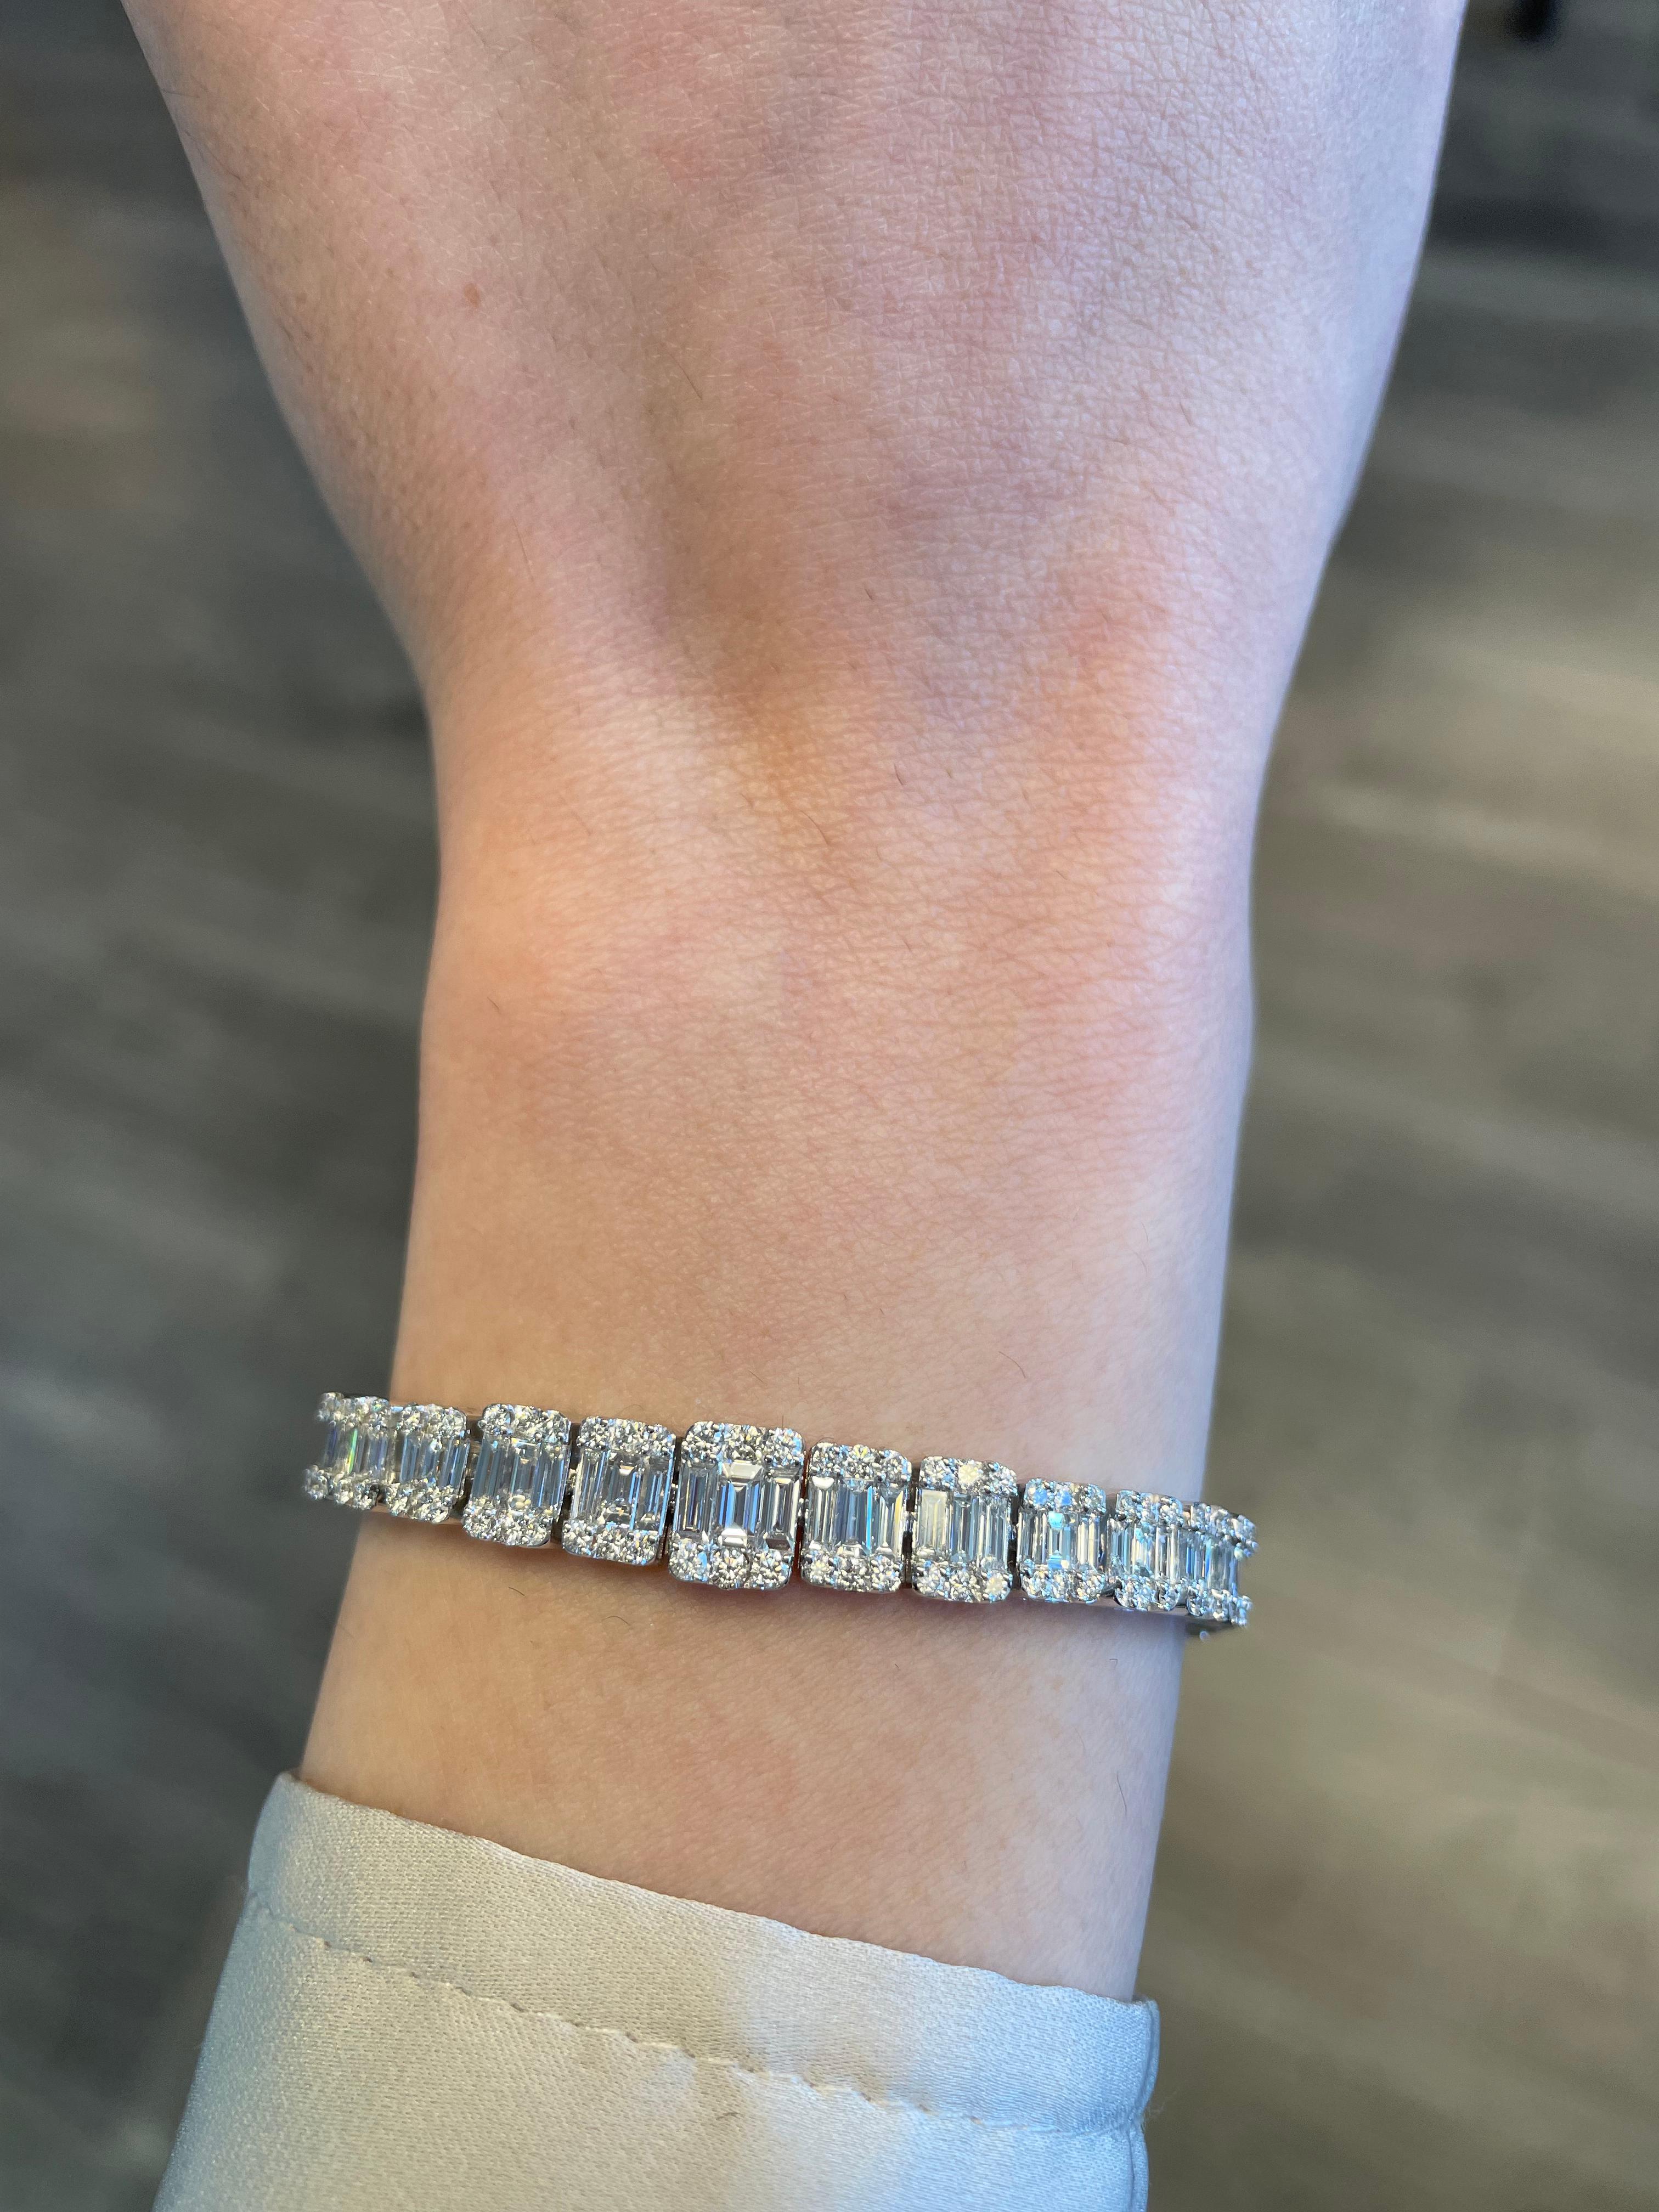 Sensational modern round and baguette 18k white gold bracelet.. By Alexander Beverly Hills.
369 round and baguette cut diamonds, 6.56 carats. Approximately G/H color and VS1-SI1 clarity. 18-karat white gold, 23.12 grams, 7 inches.
Accommodated with